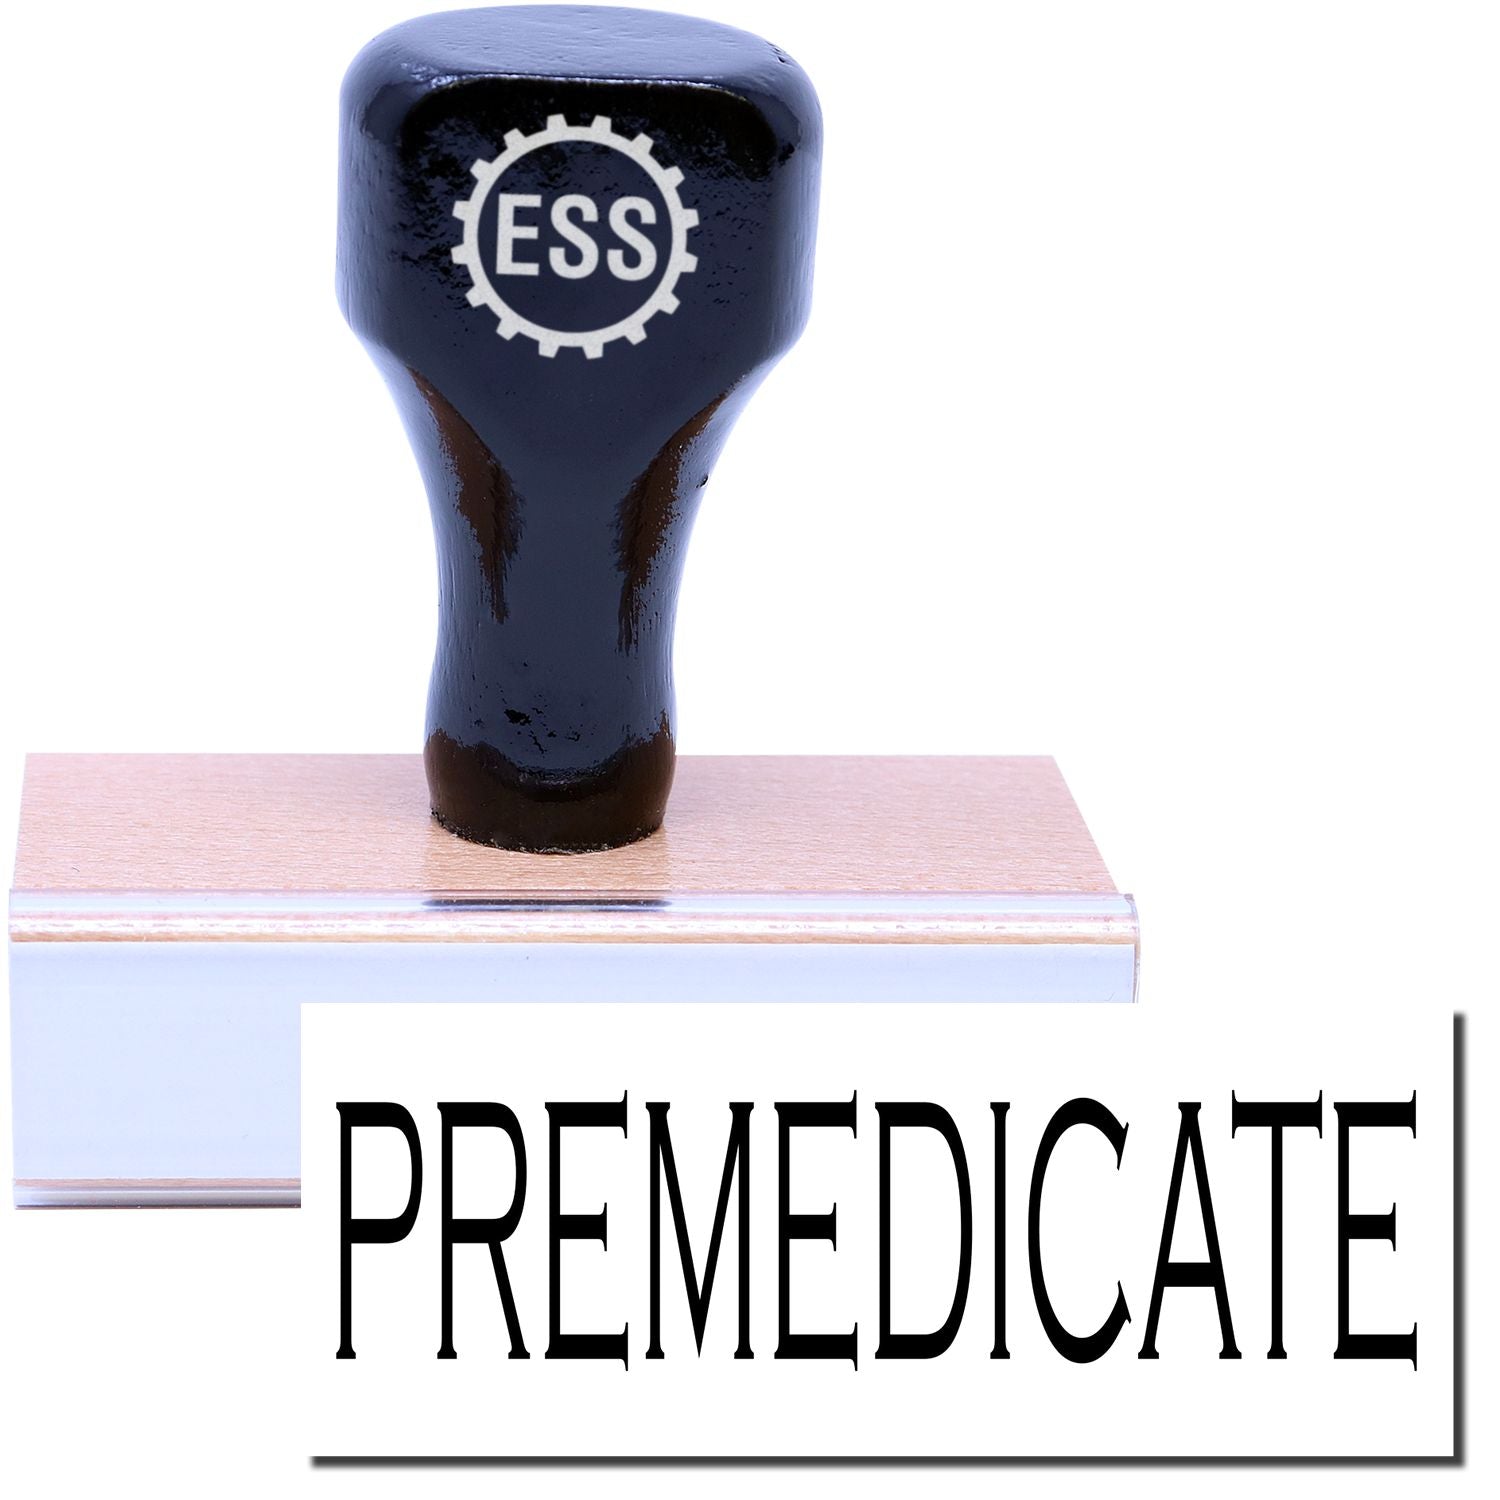 A stock office rubber stamp with a stamped image showing how the text "PREMEDICATE" in a large font is displayed after stamping.